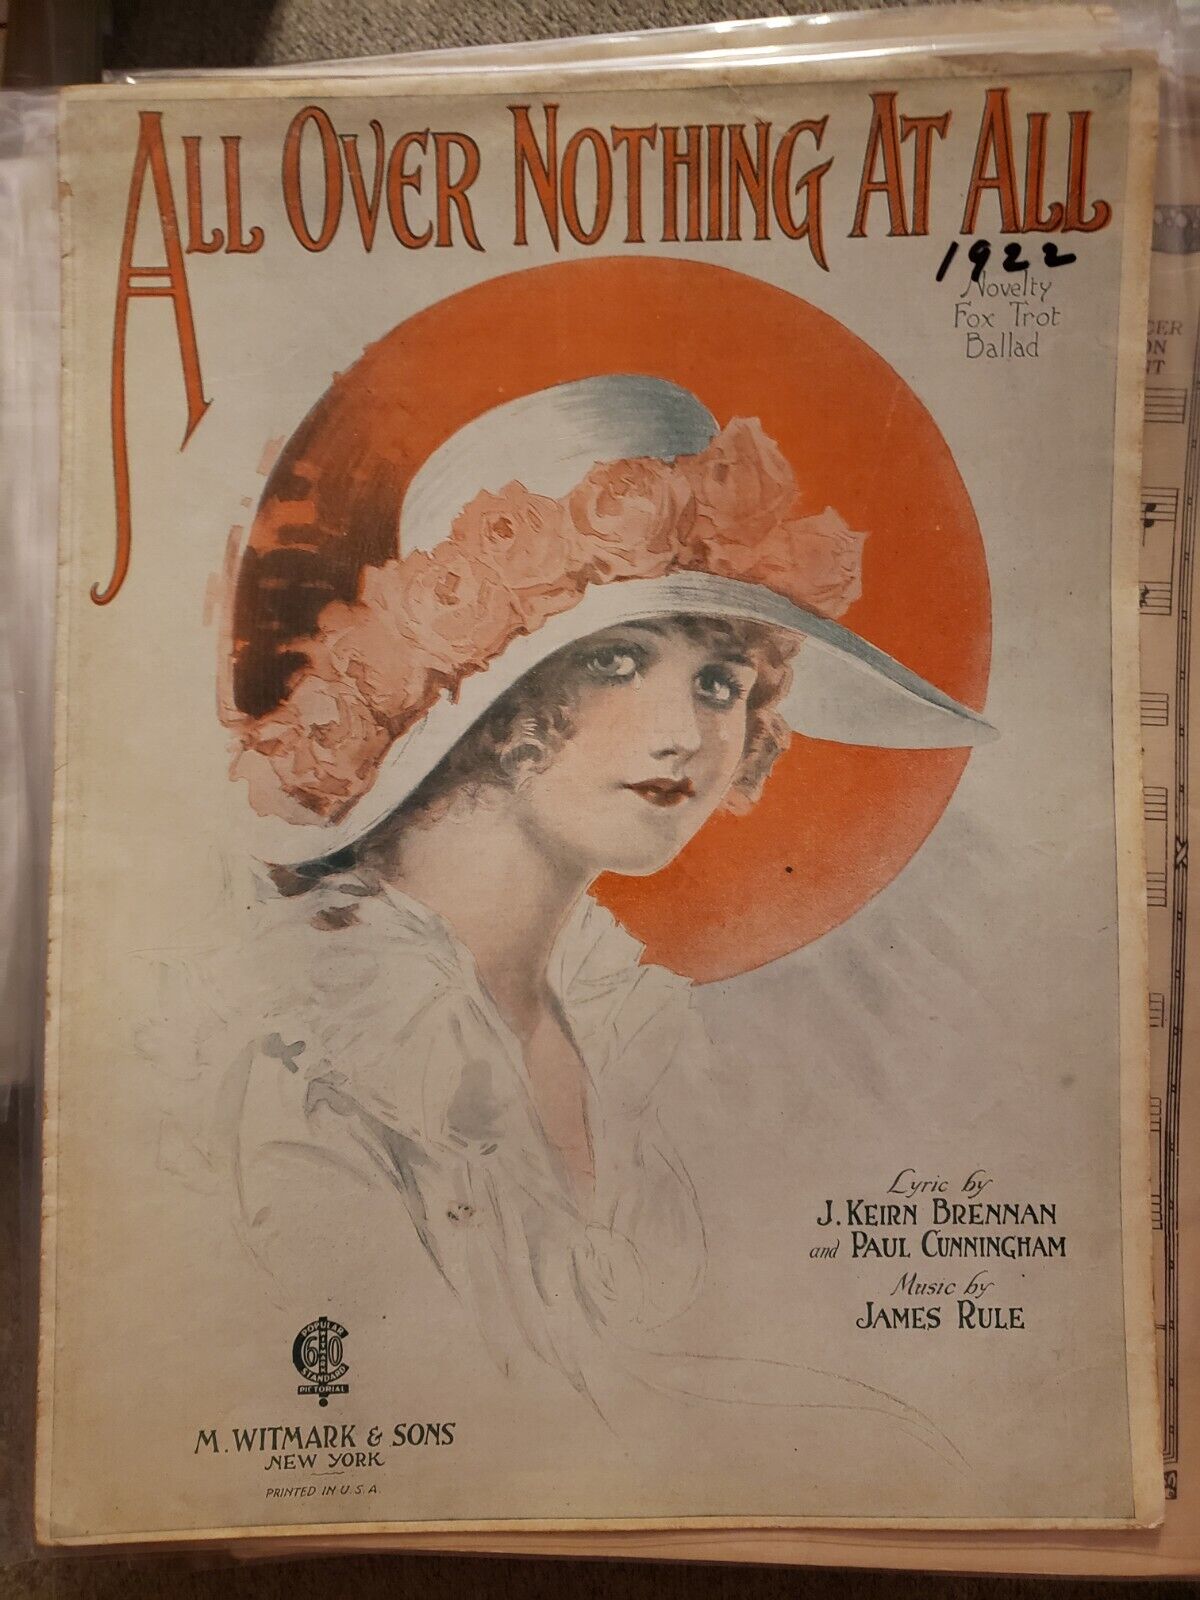 Vintage Sheet Music 1922 All Over Nothing At All Keirn Brennan Paul Cunningham